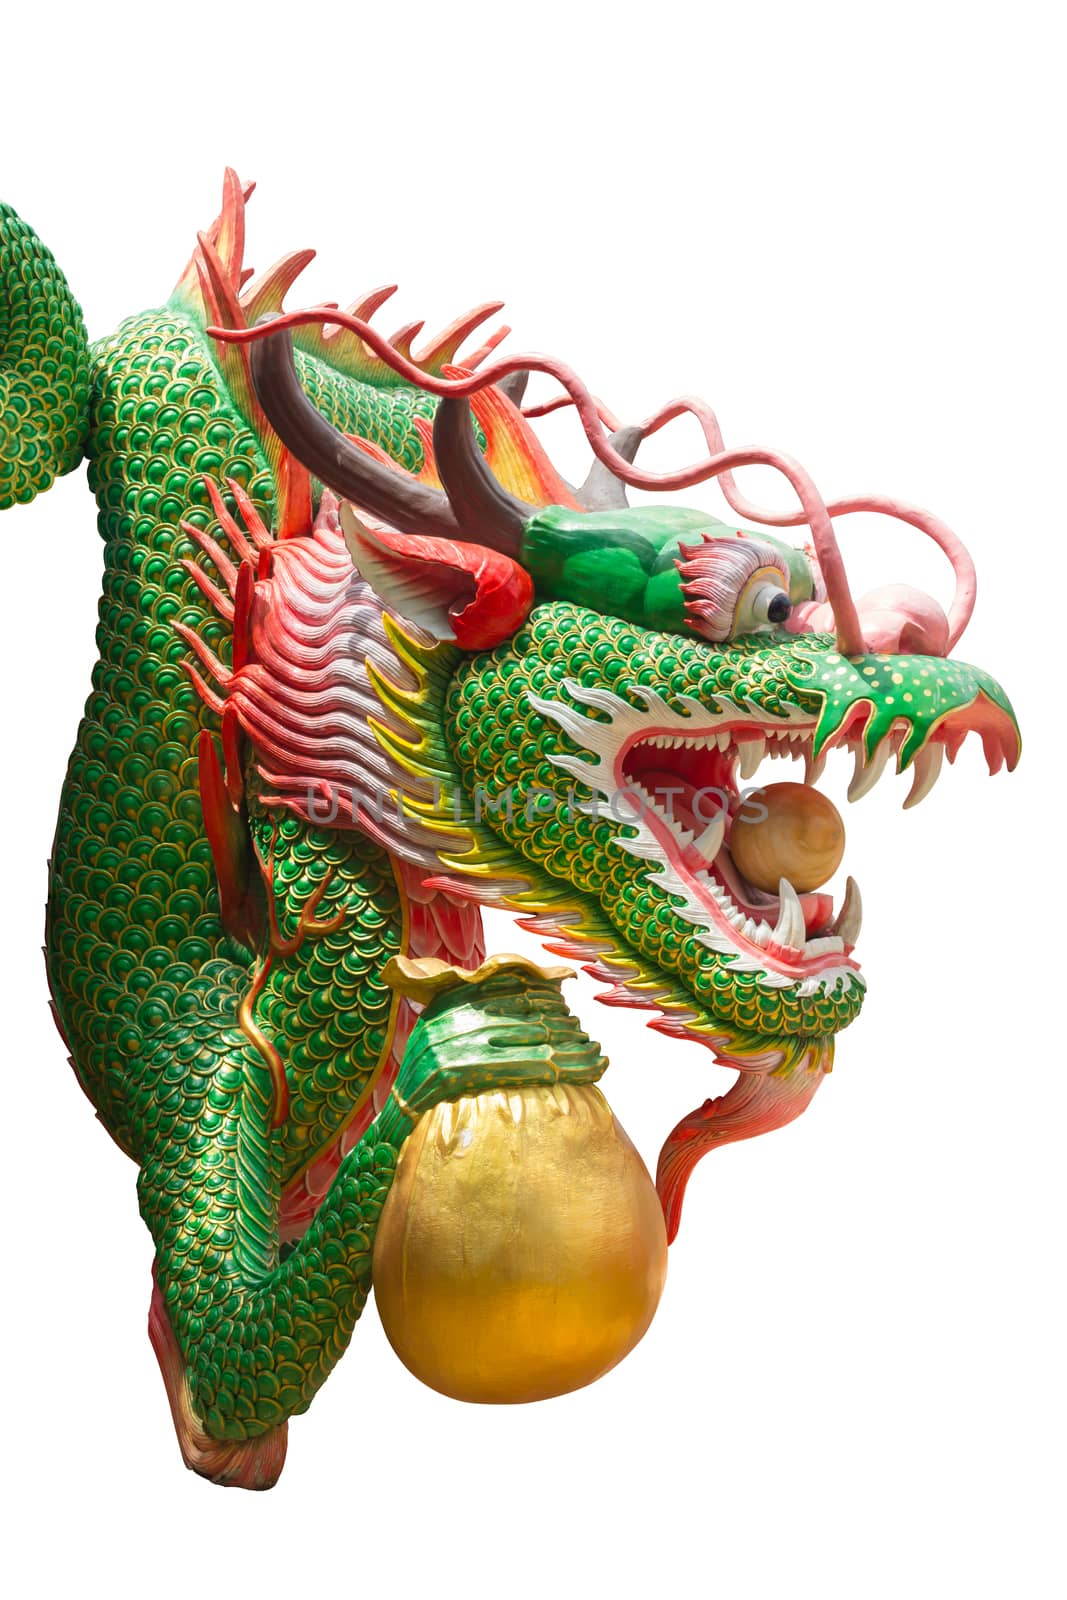 Chinese dragon statue isolated on white background.